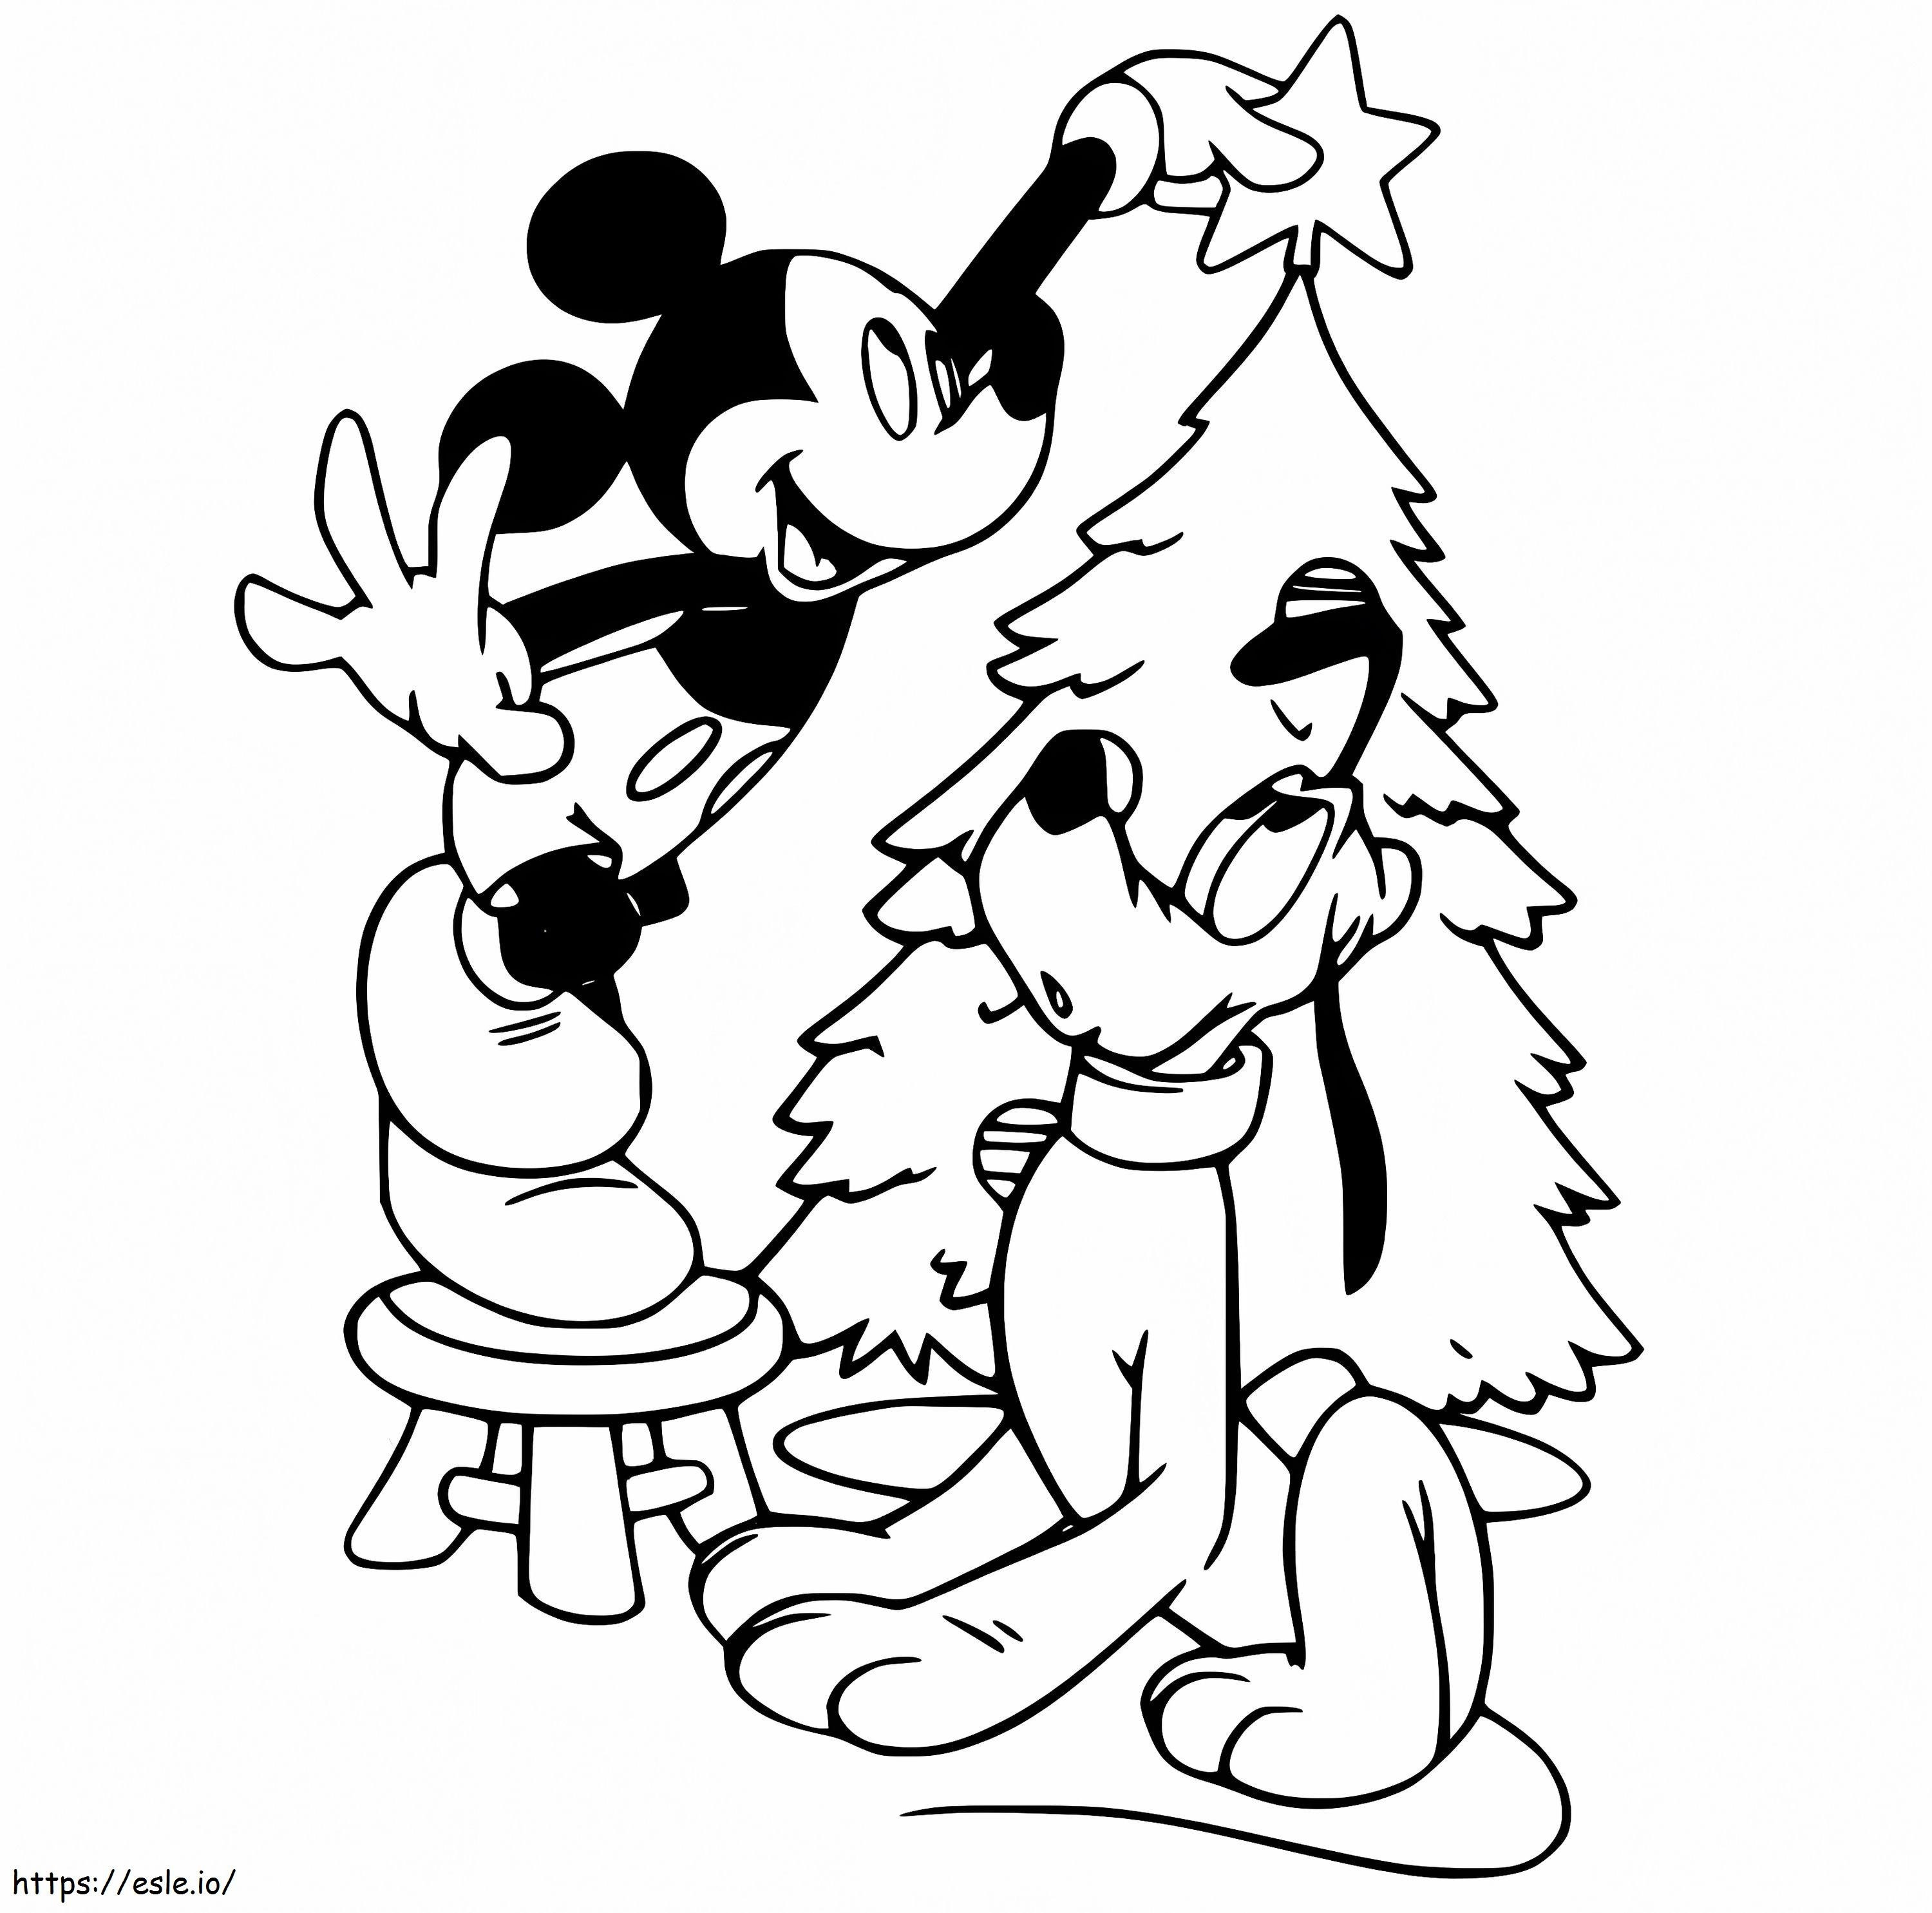 Mickey Decorating Christmas Tree coloring page